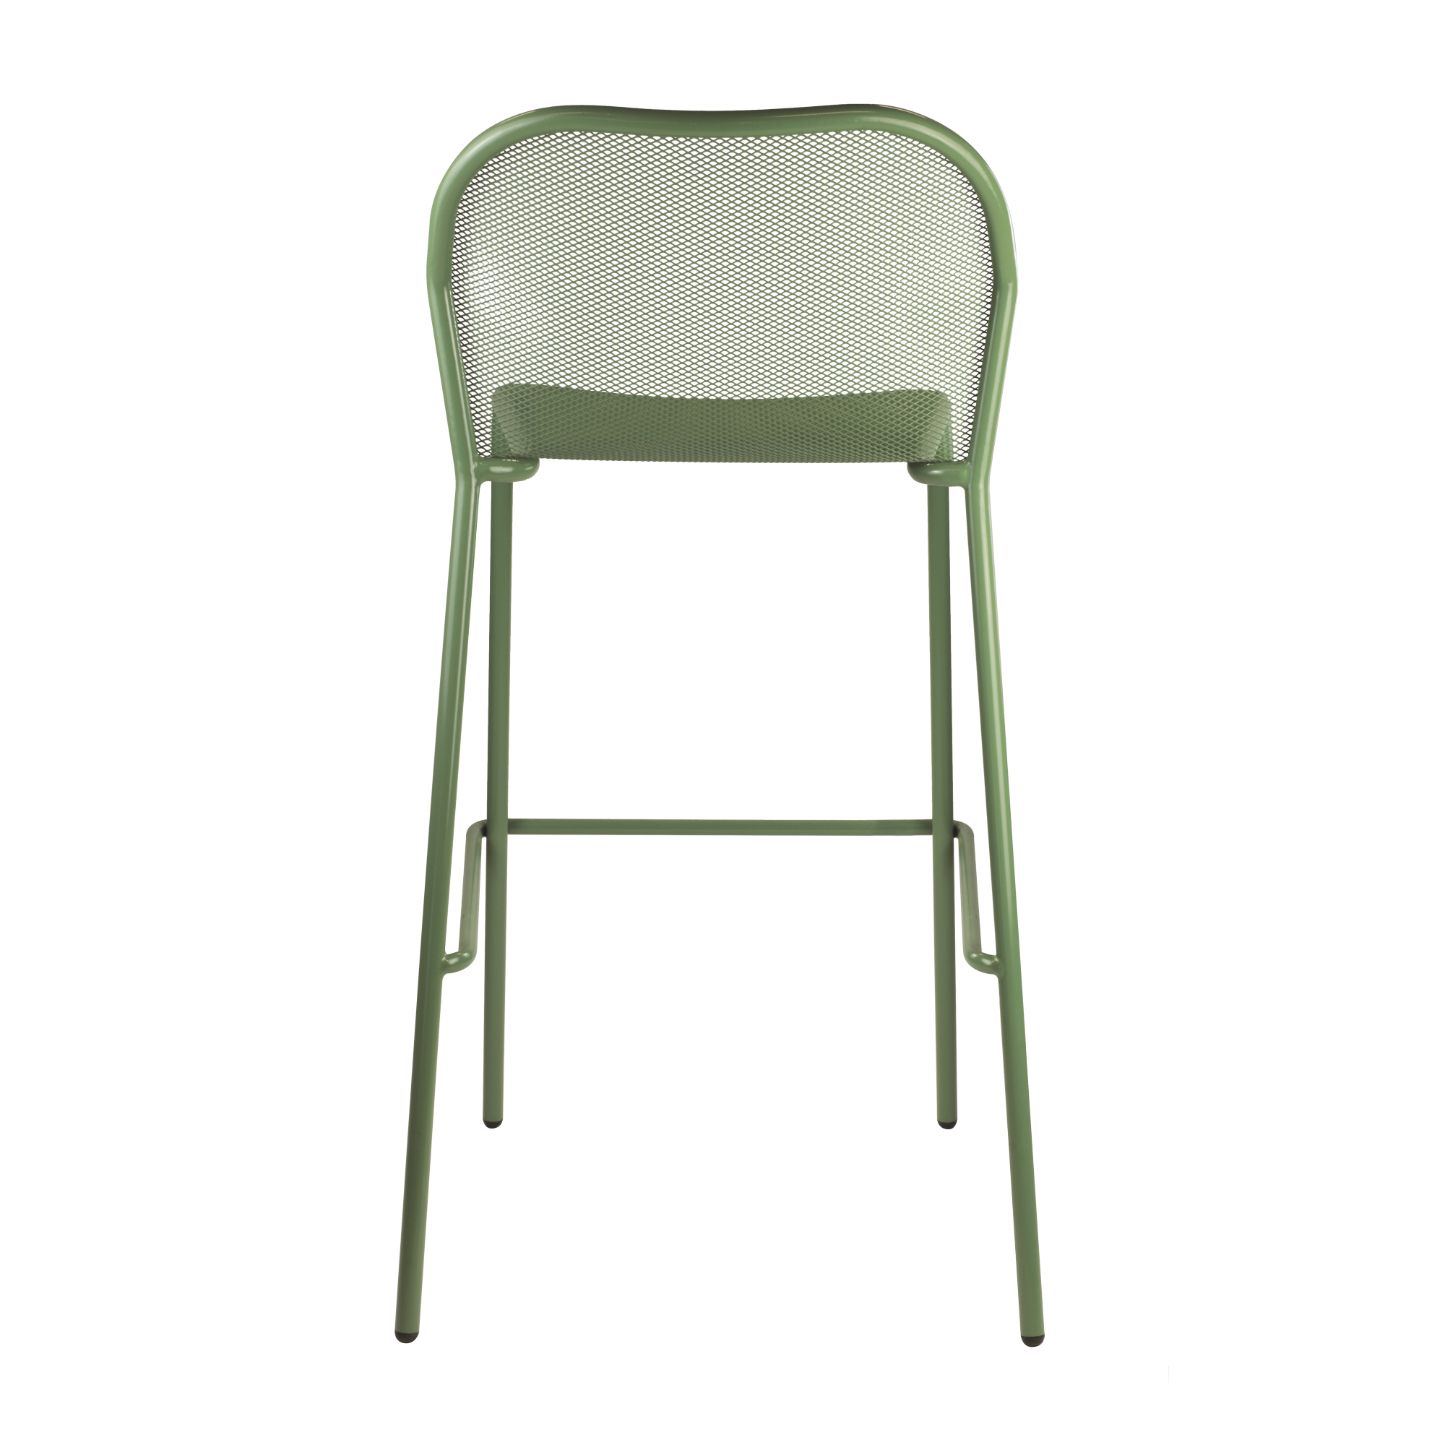 Olive Green Nova Stackable Bar Stool for Indoor and Outdoor Use - Back View